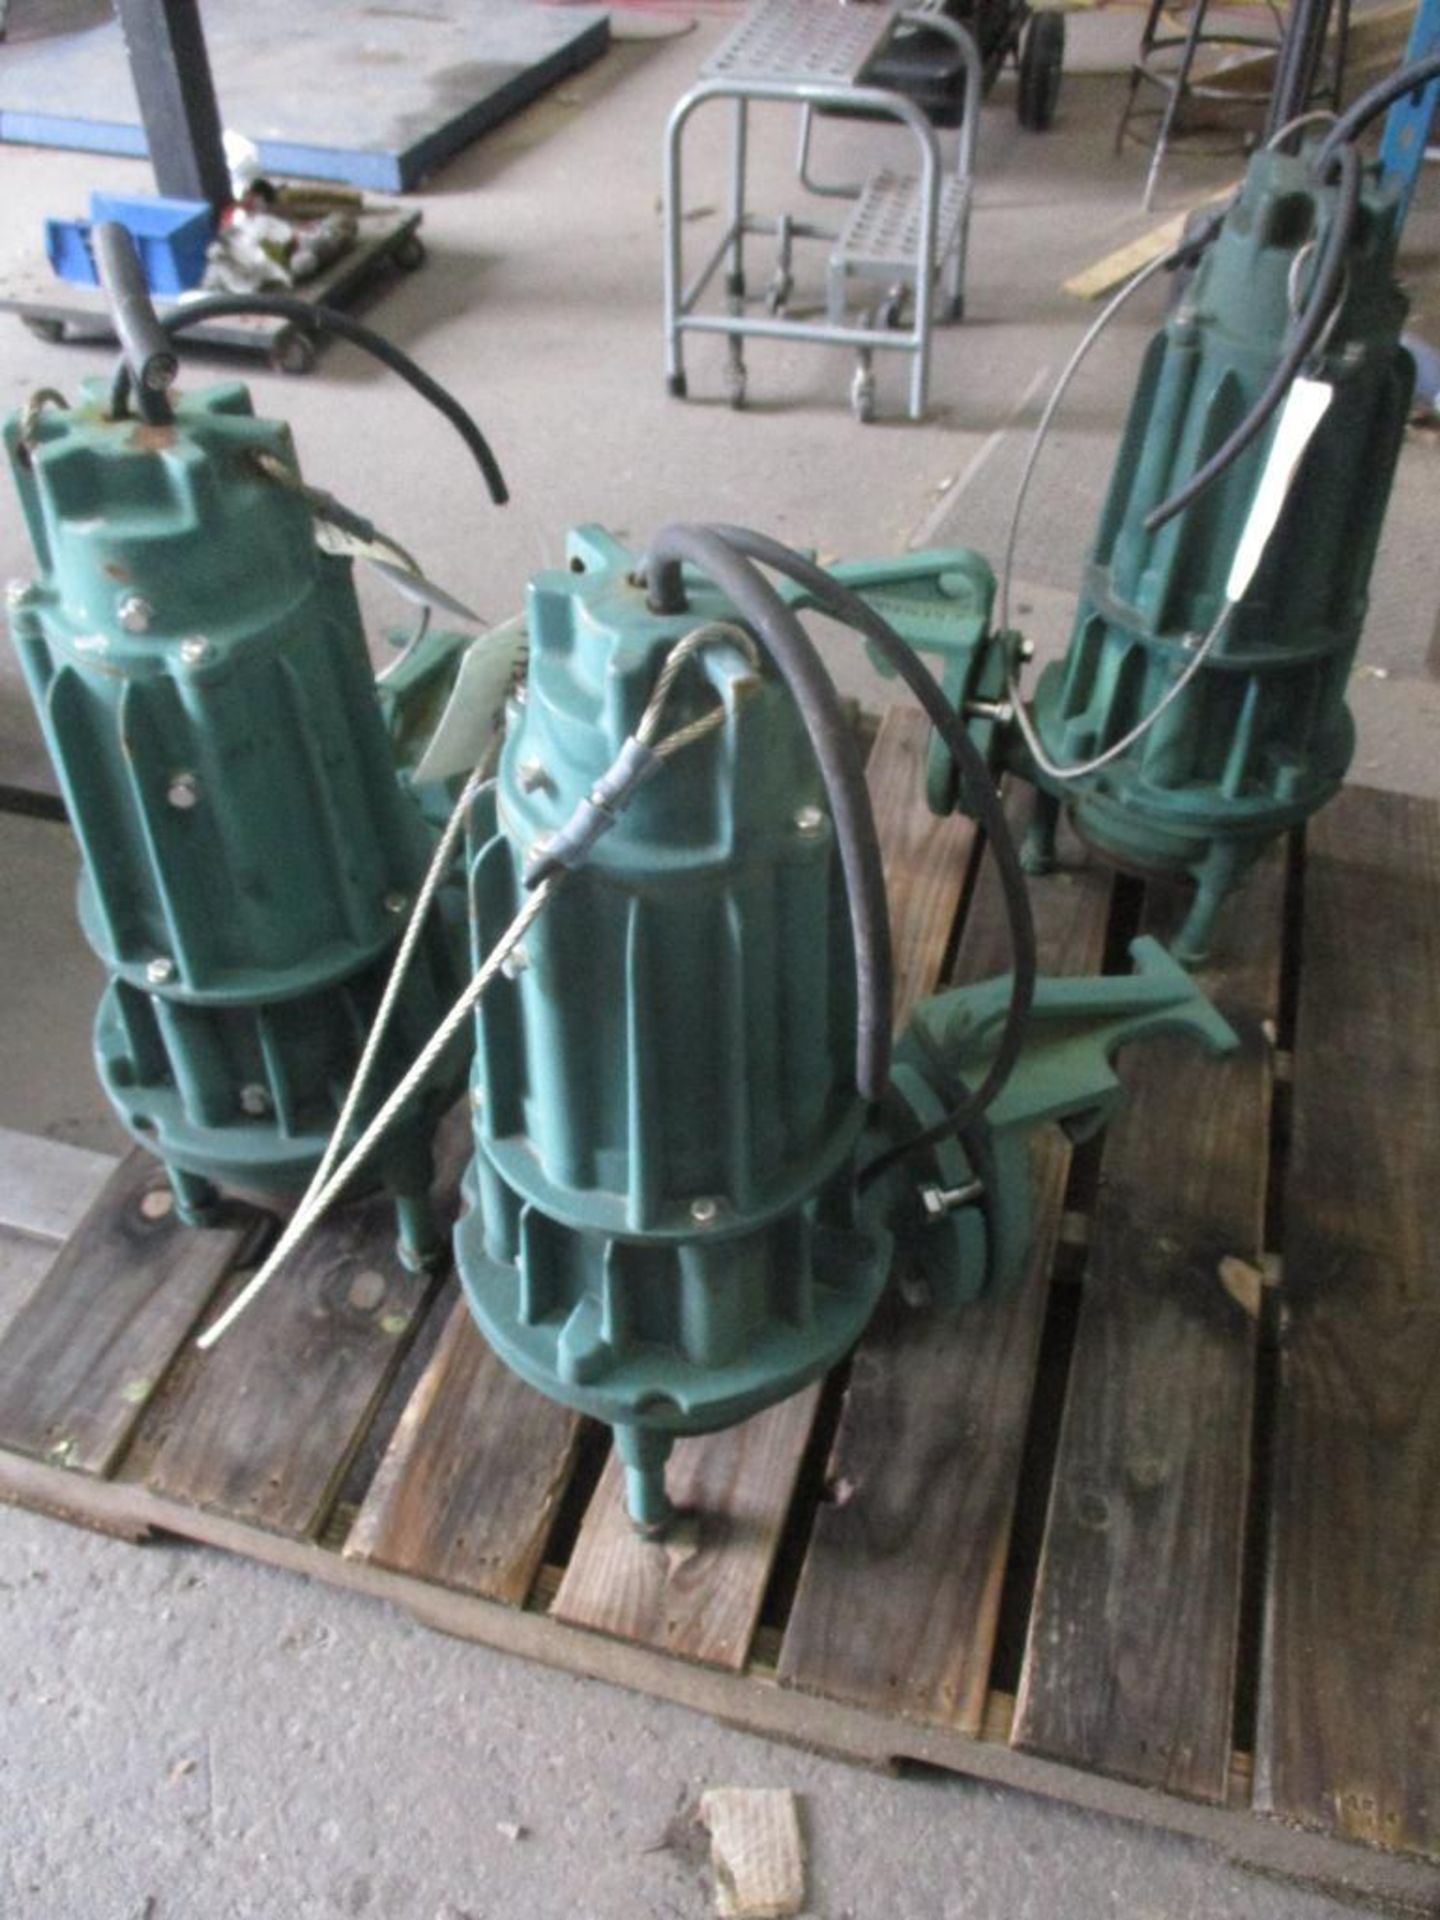 (3) (Used) Zoeller 3" Submersible Pumps - Image 3 of 4